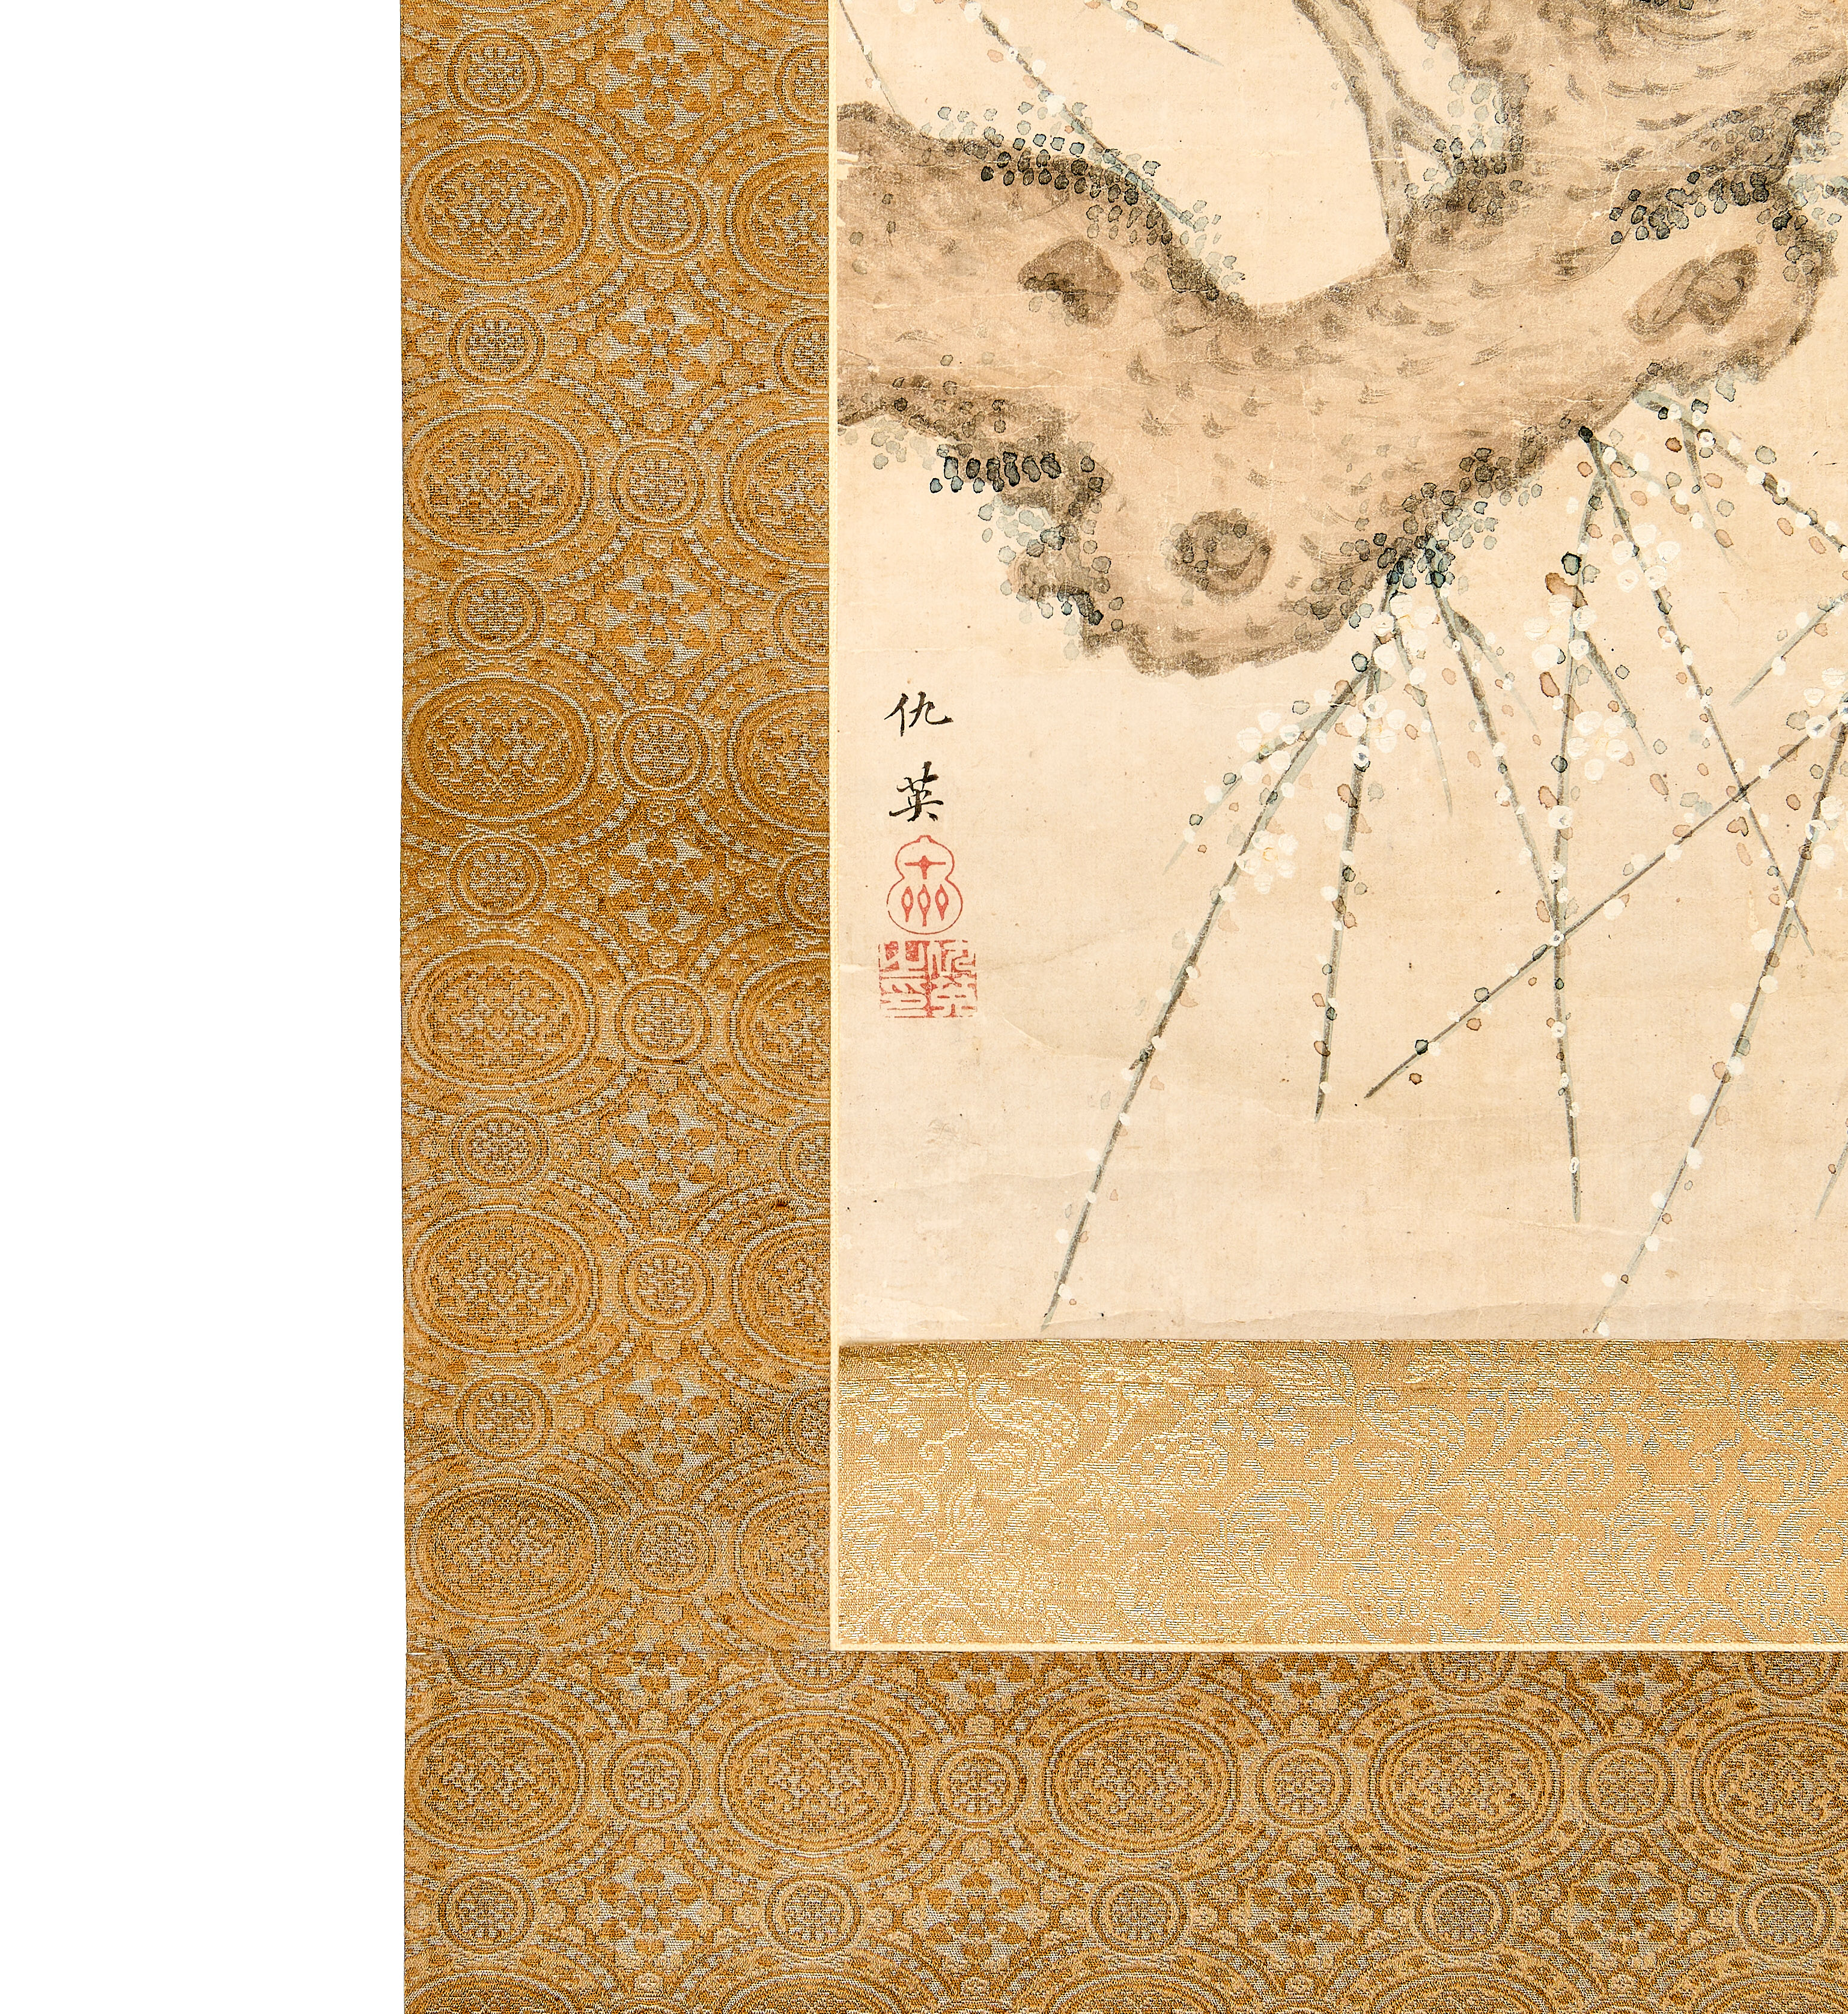 A JAPANESE SCROLL, MEIJI PERIOD (1868-1912) - Image 2 of 2